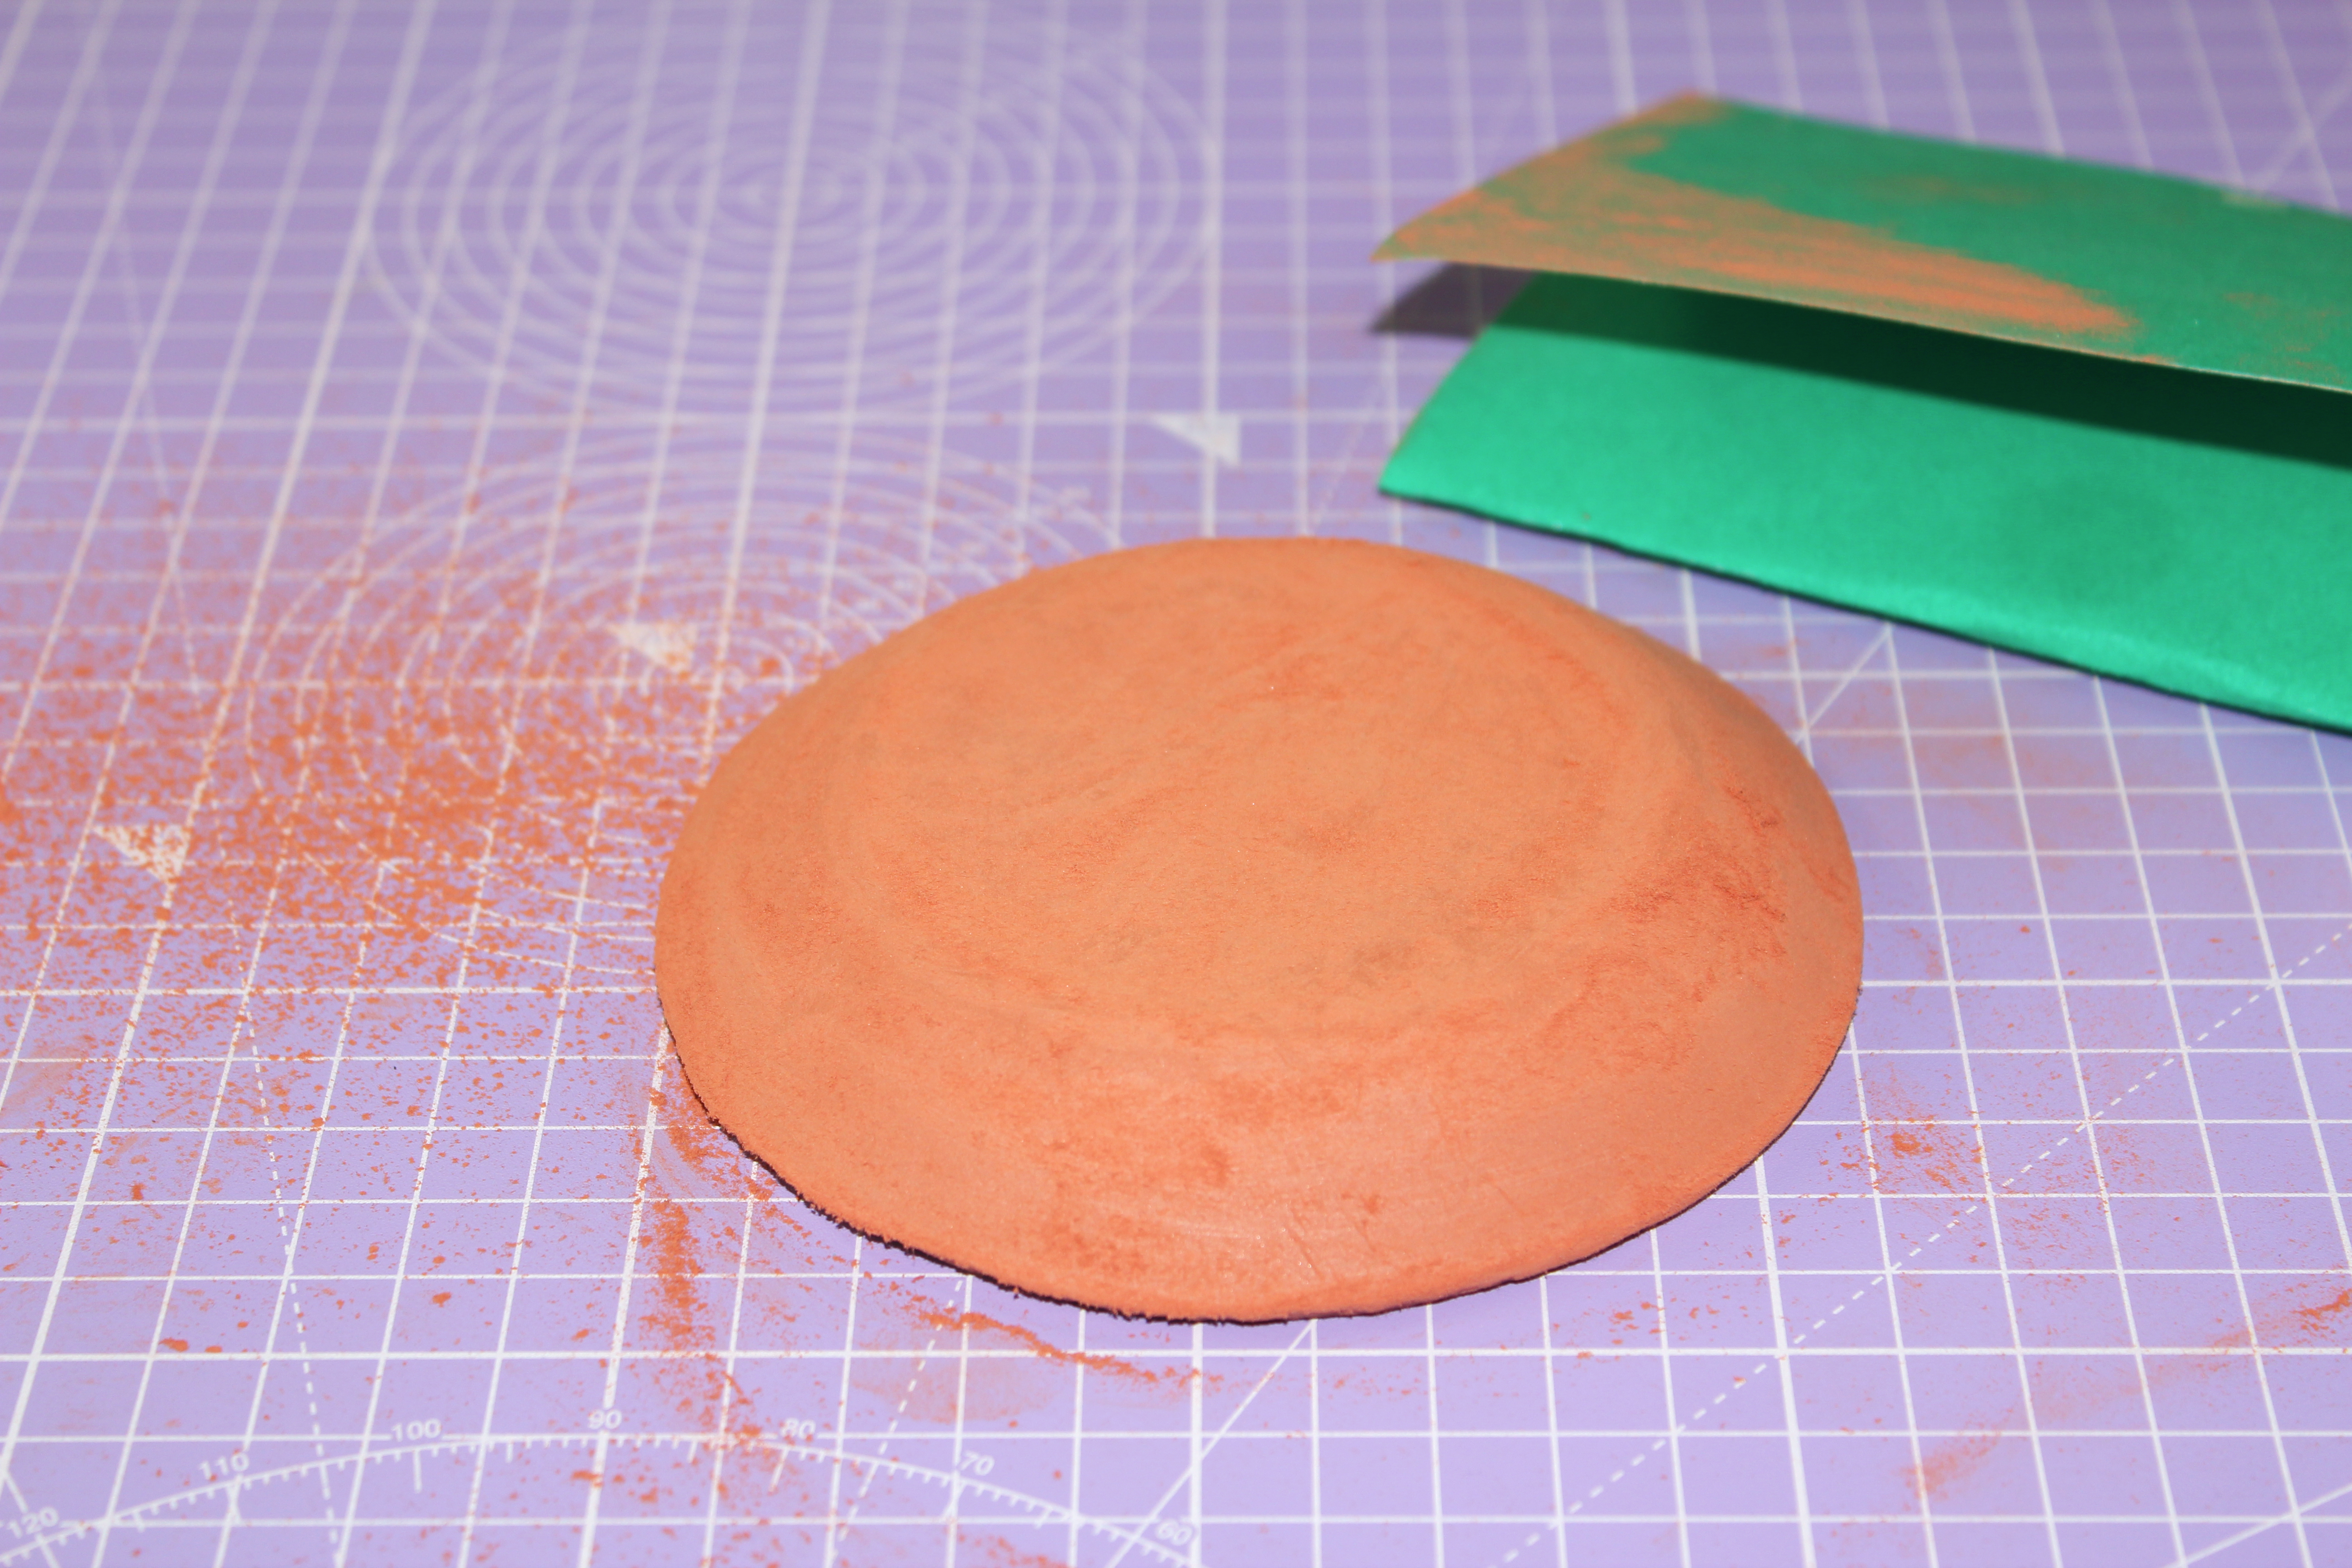 How to use air dry clay, air dry clay projects – step 9